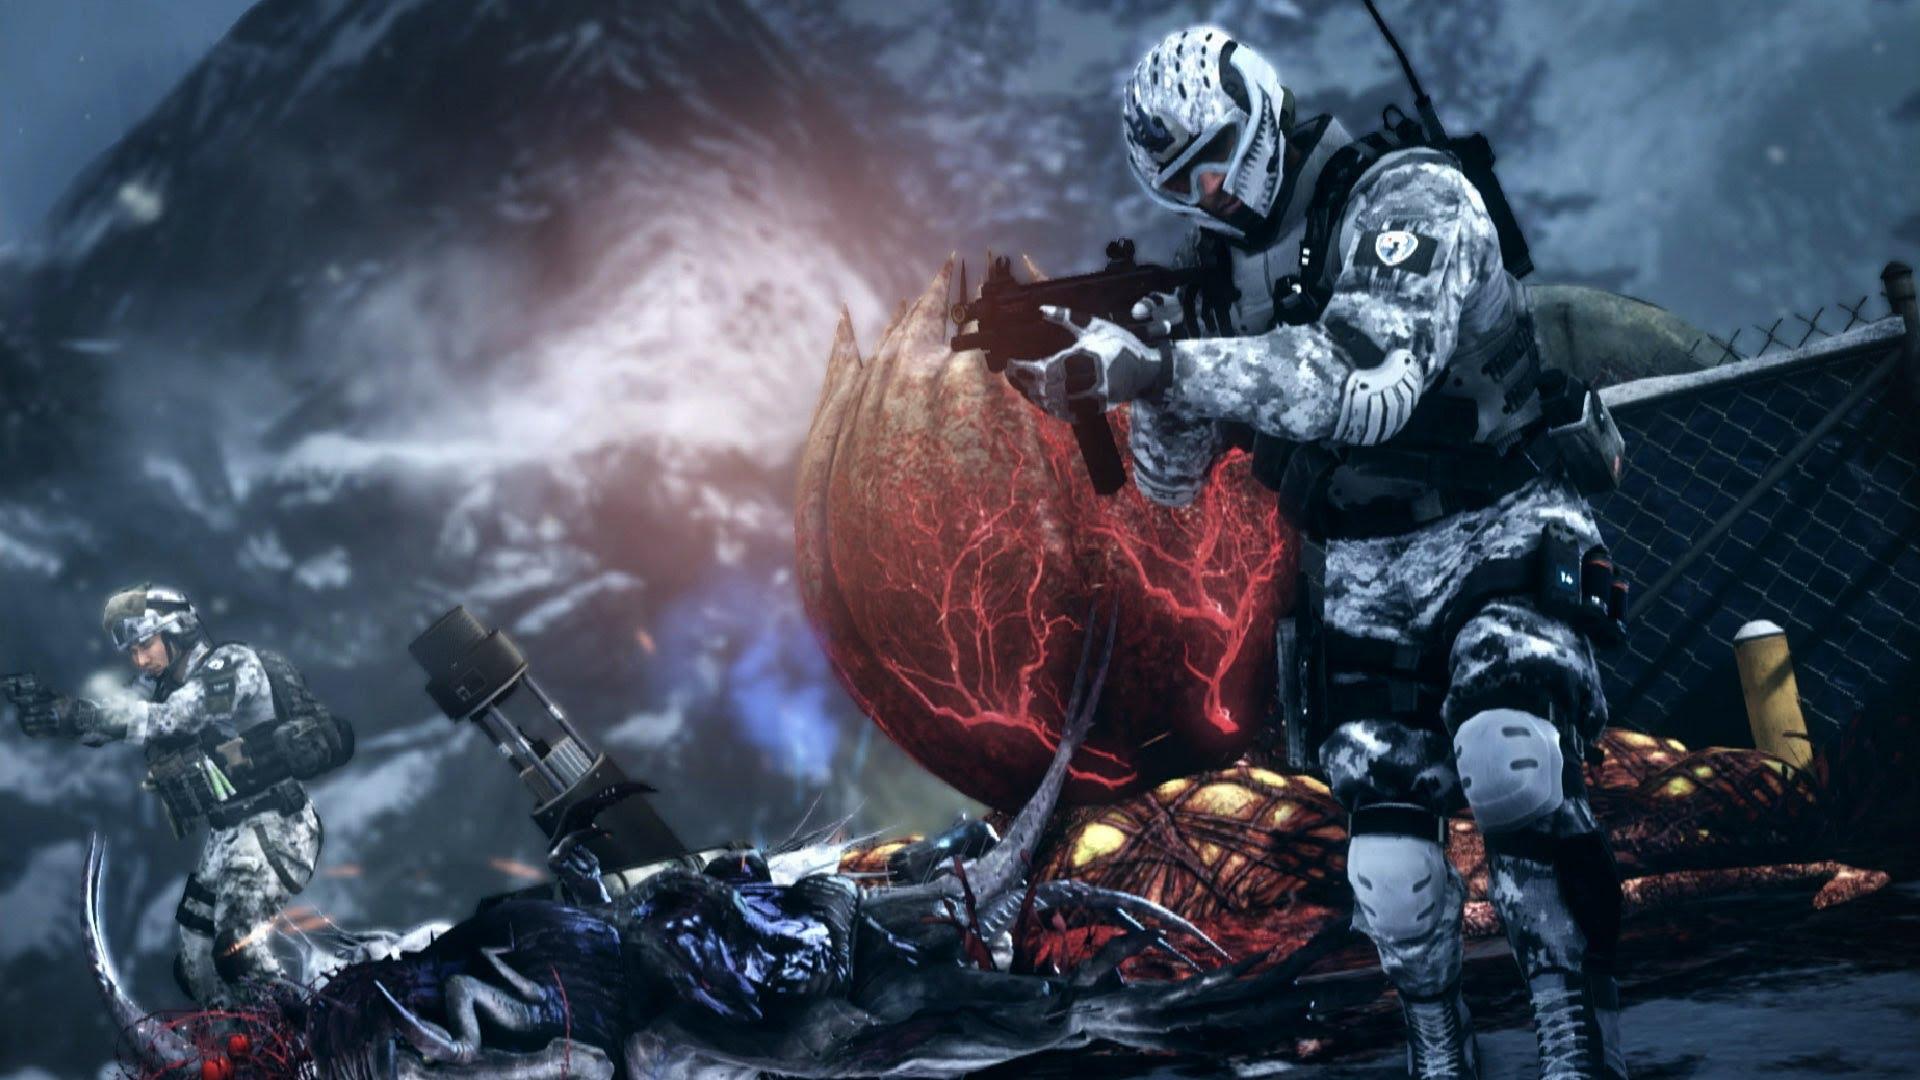 Review: Call of Duty: Ghosts - Hardcore Gamer